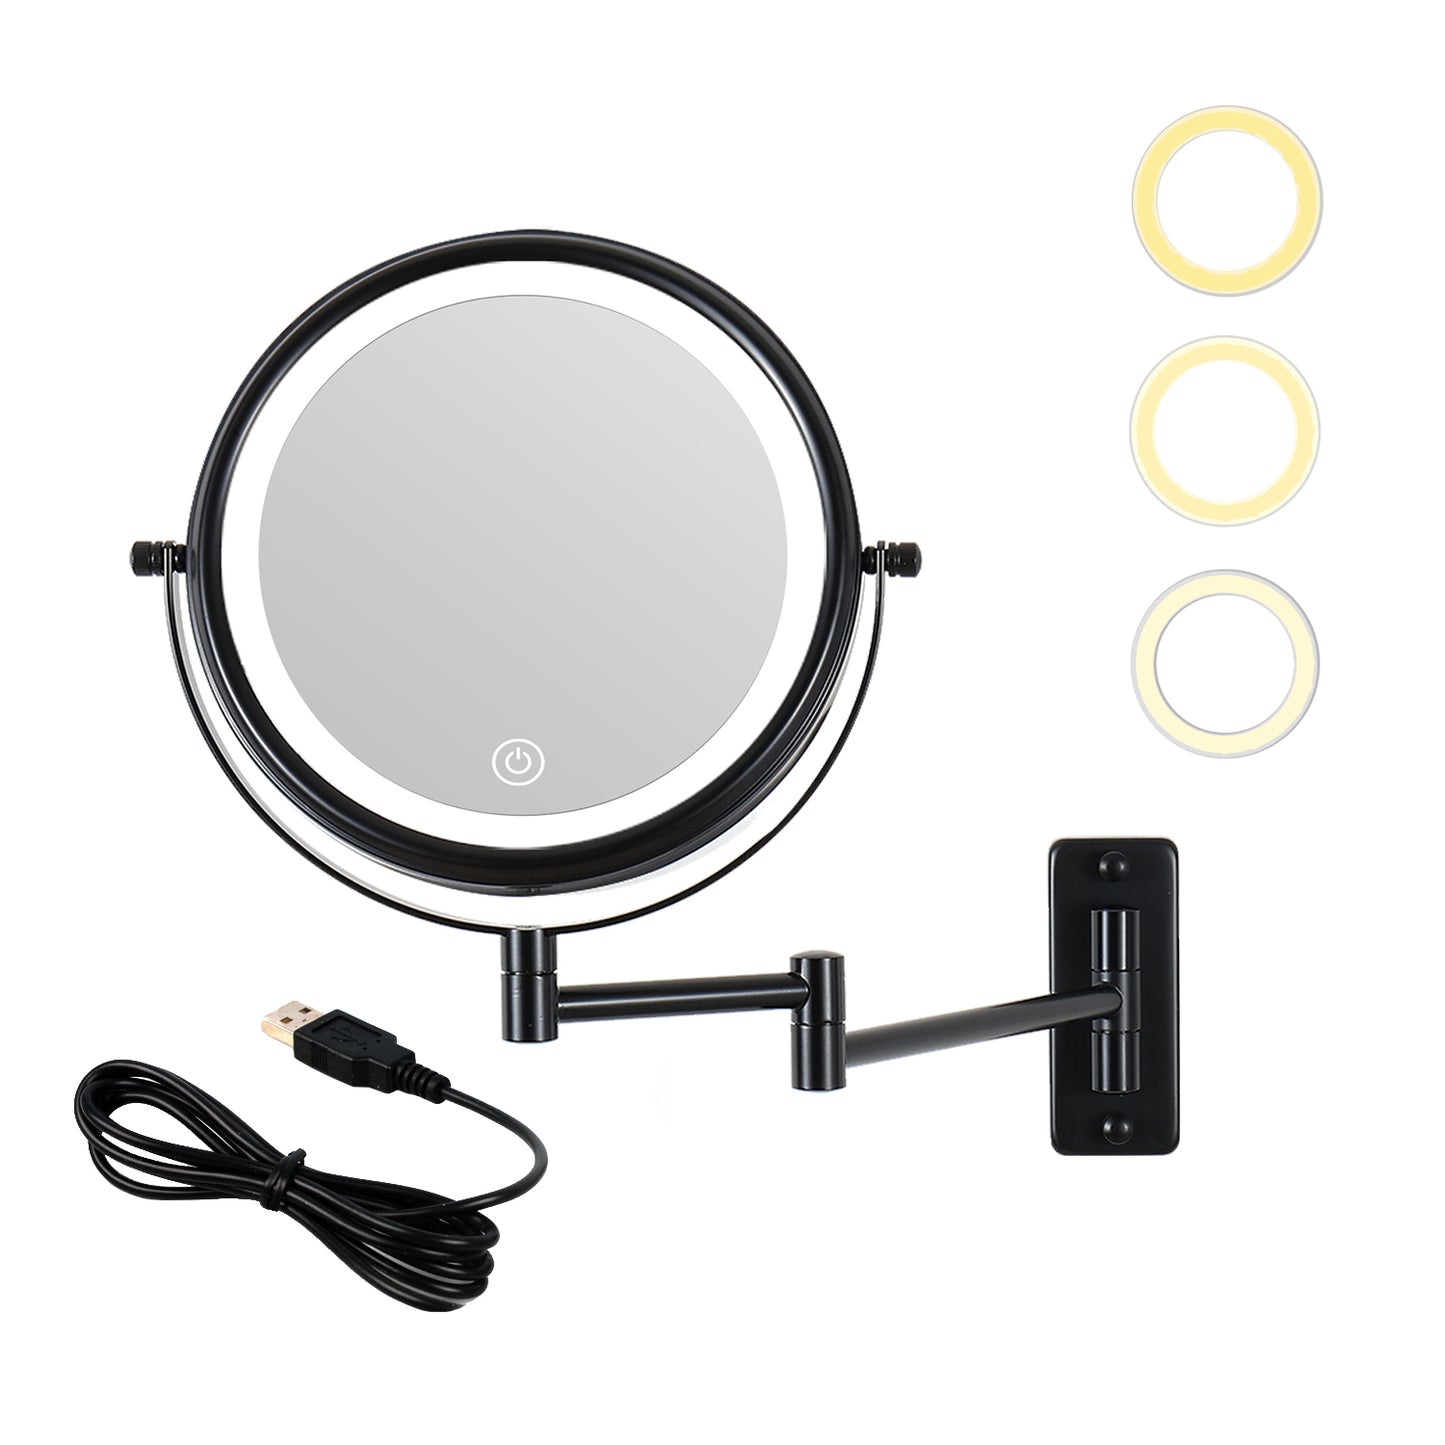 8-inch Wall Mounted Makeup Vanity Mirror, 3 colors Led lights, 1X/10X Magnification Mirror, 360 degree Swivel with Extension Arm (Black)